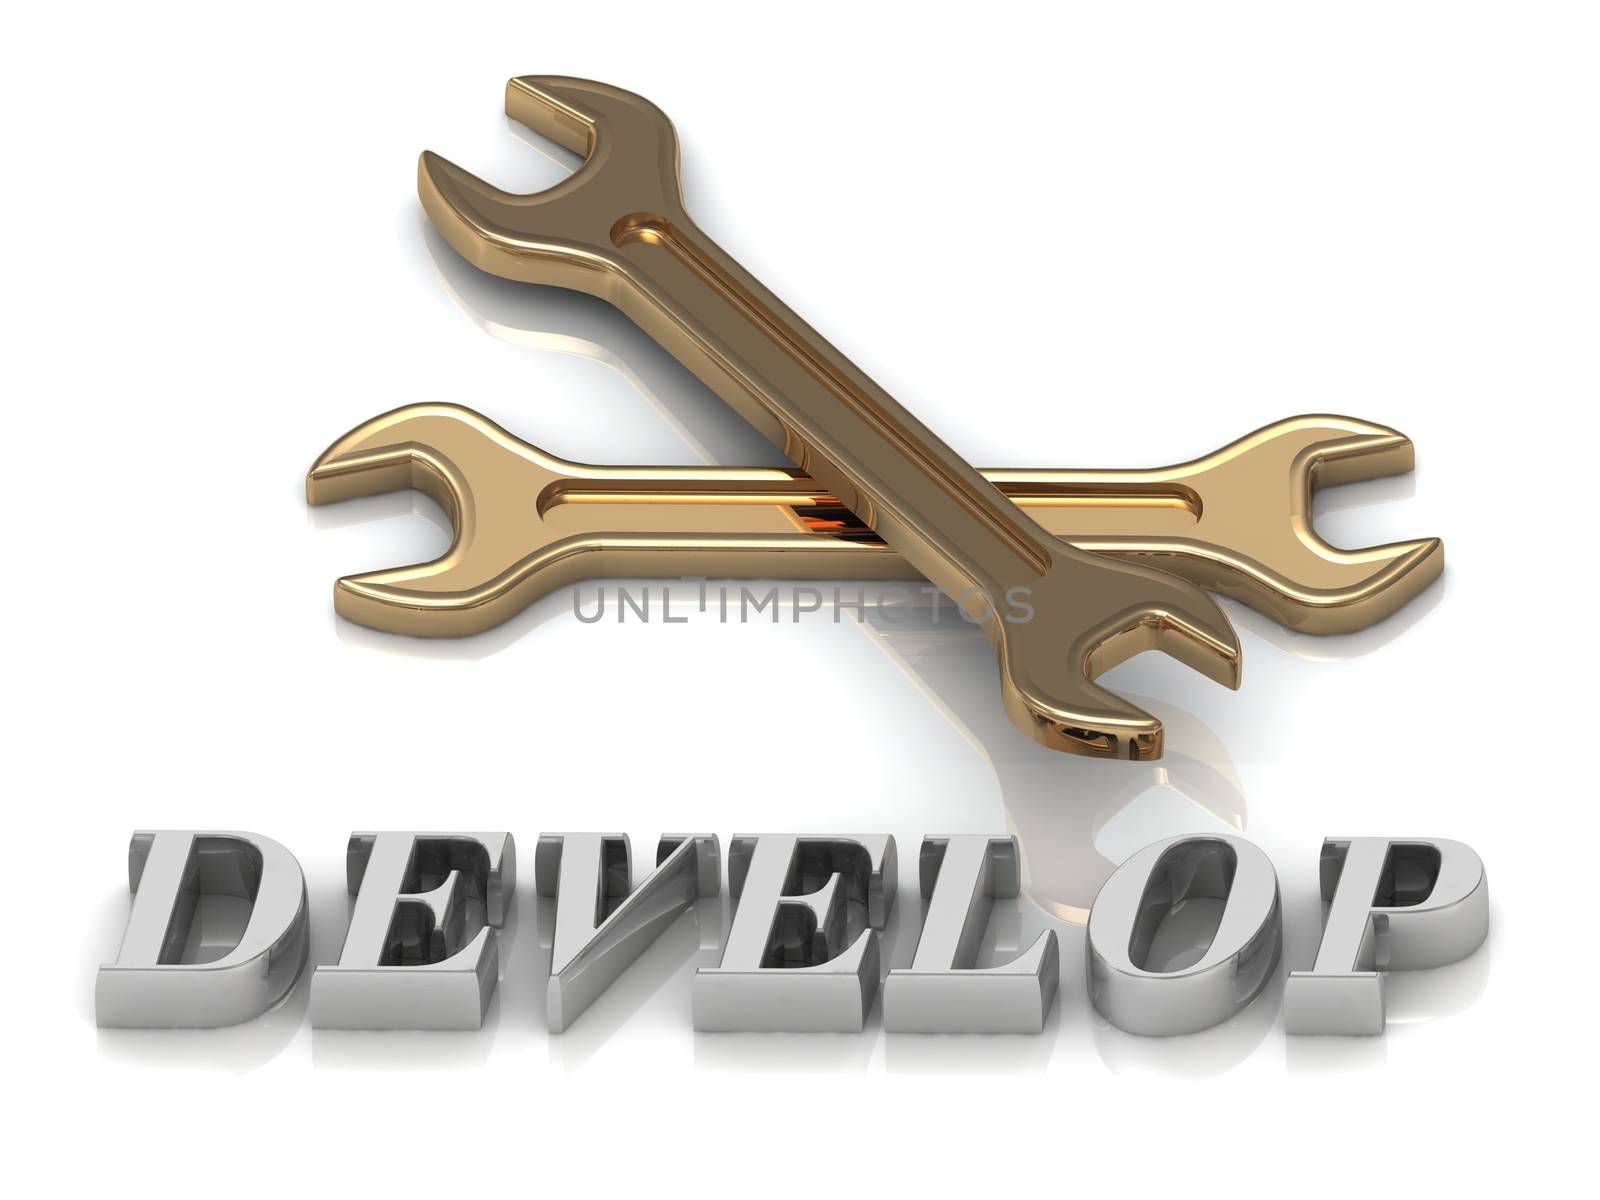 DEVELOP- inscription of metal letters and 2 keys on white background